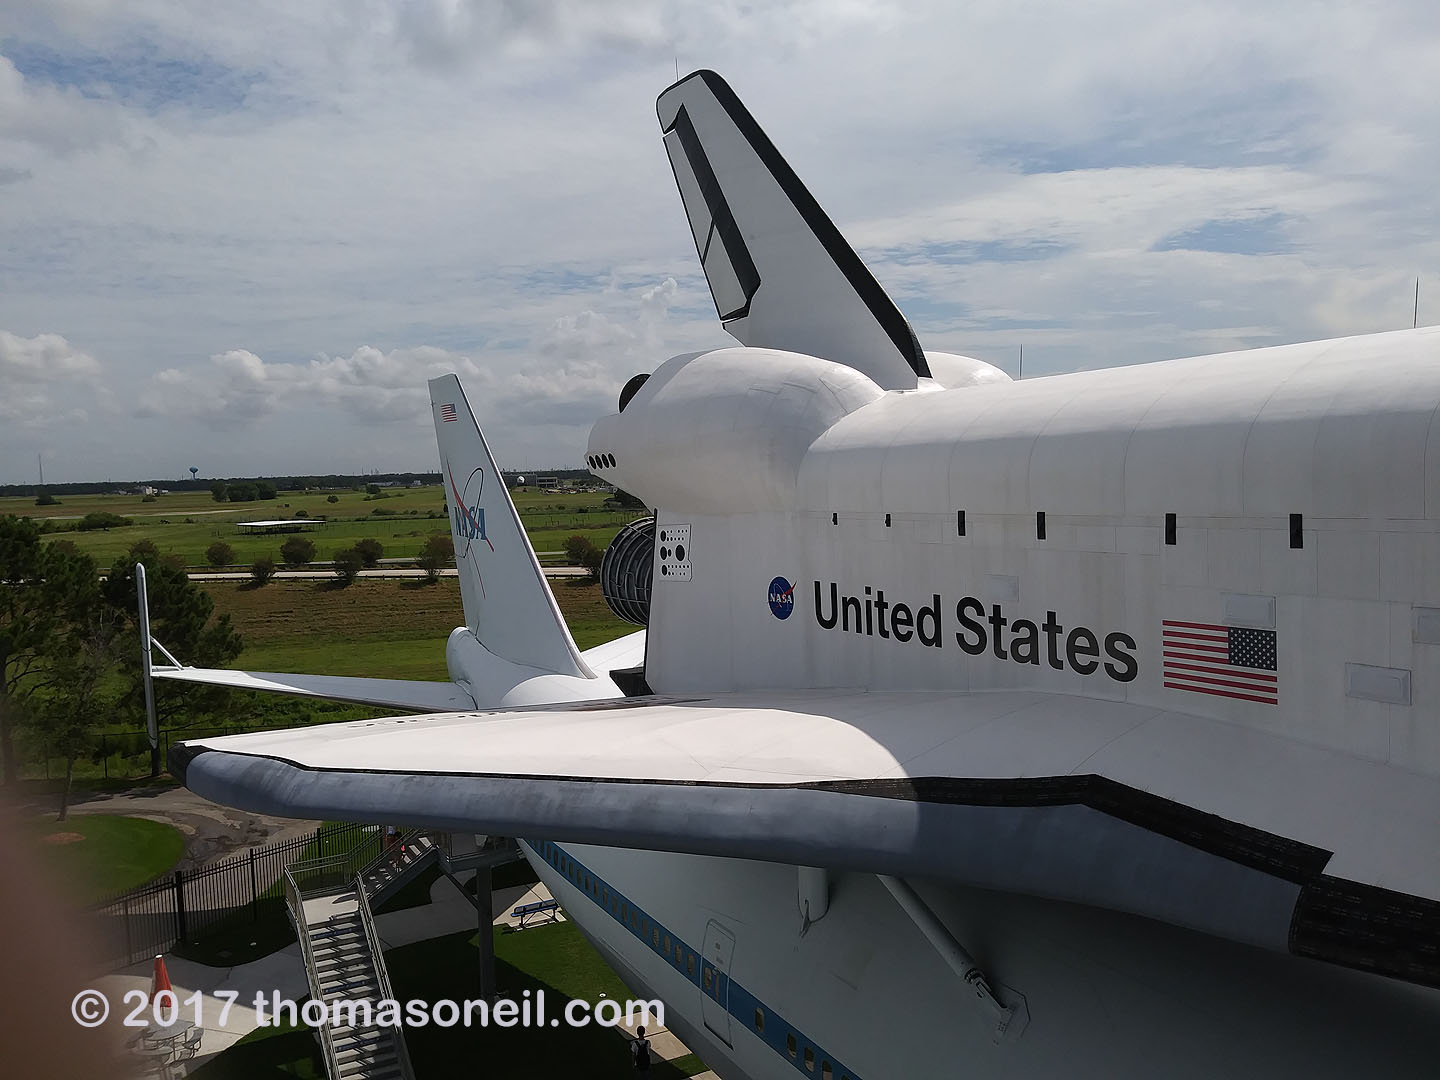 Space Shuttle Independence mounted on 747, Johnson Space Center, Houston, July 2017.  The shuttle is a replica but the 747 is one of those used in the program.  Click for next photo.